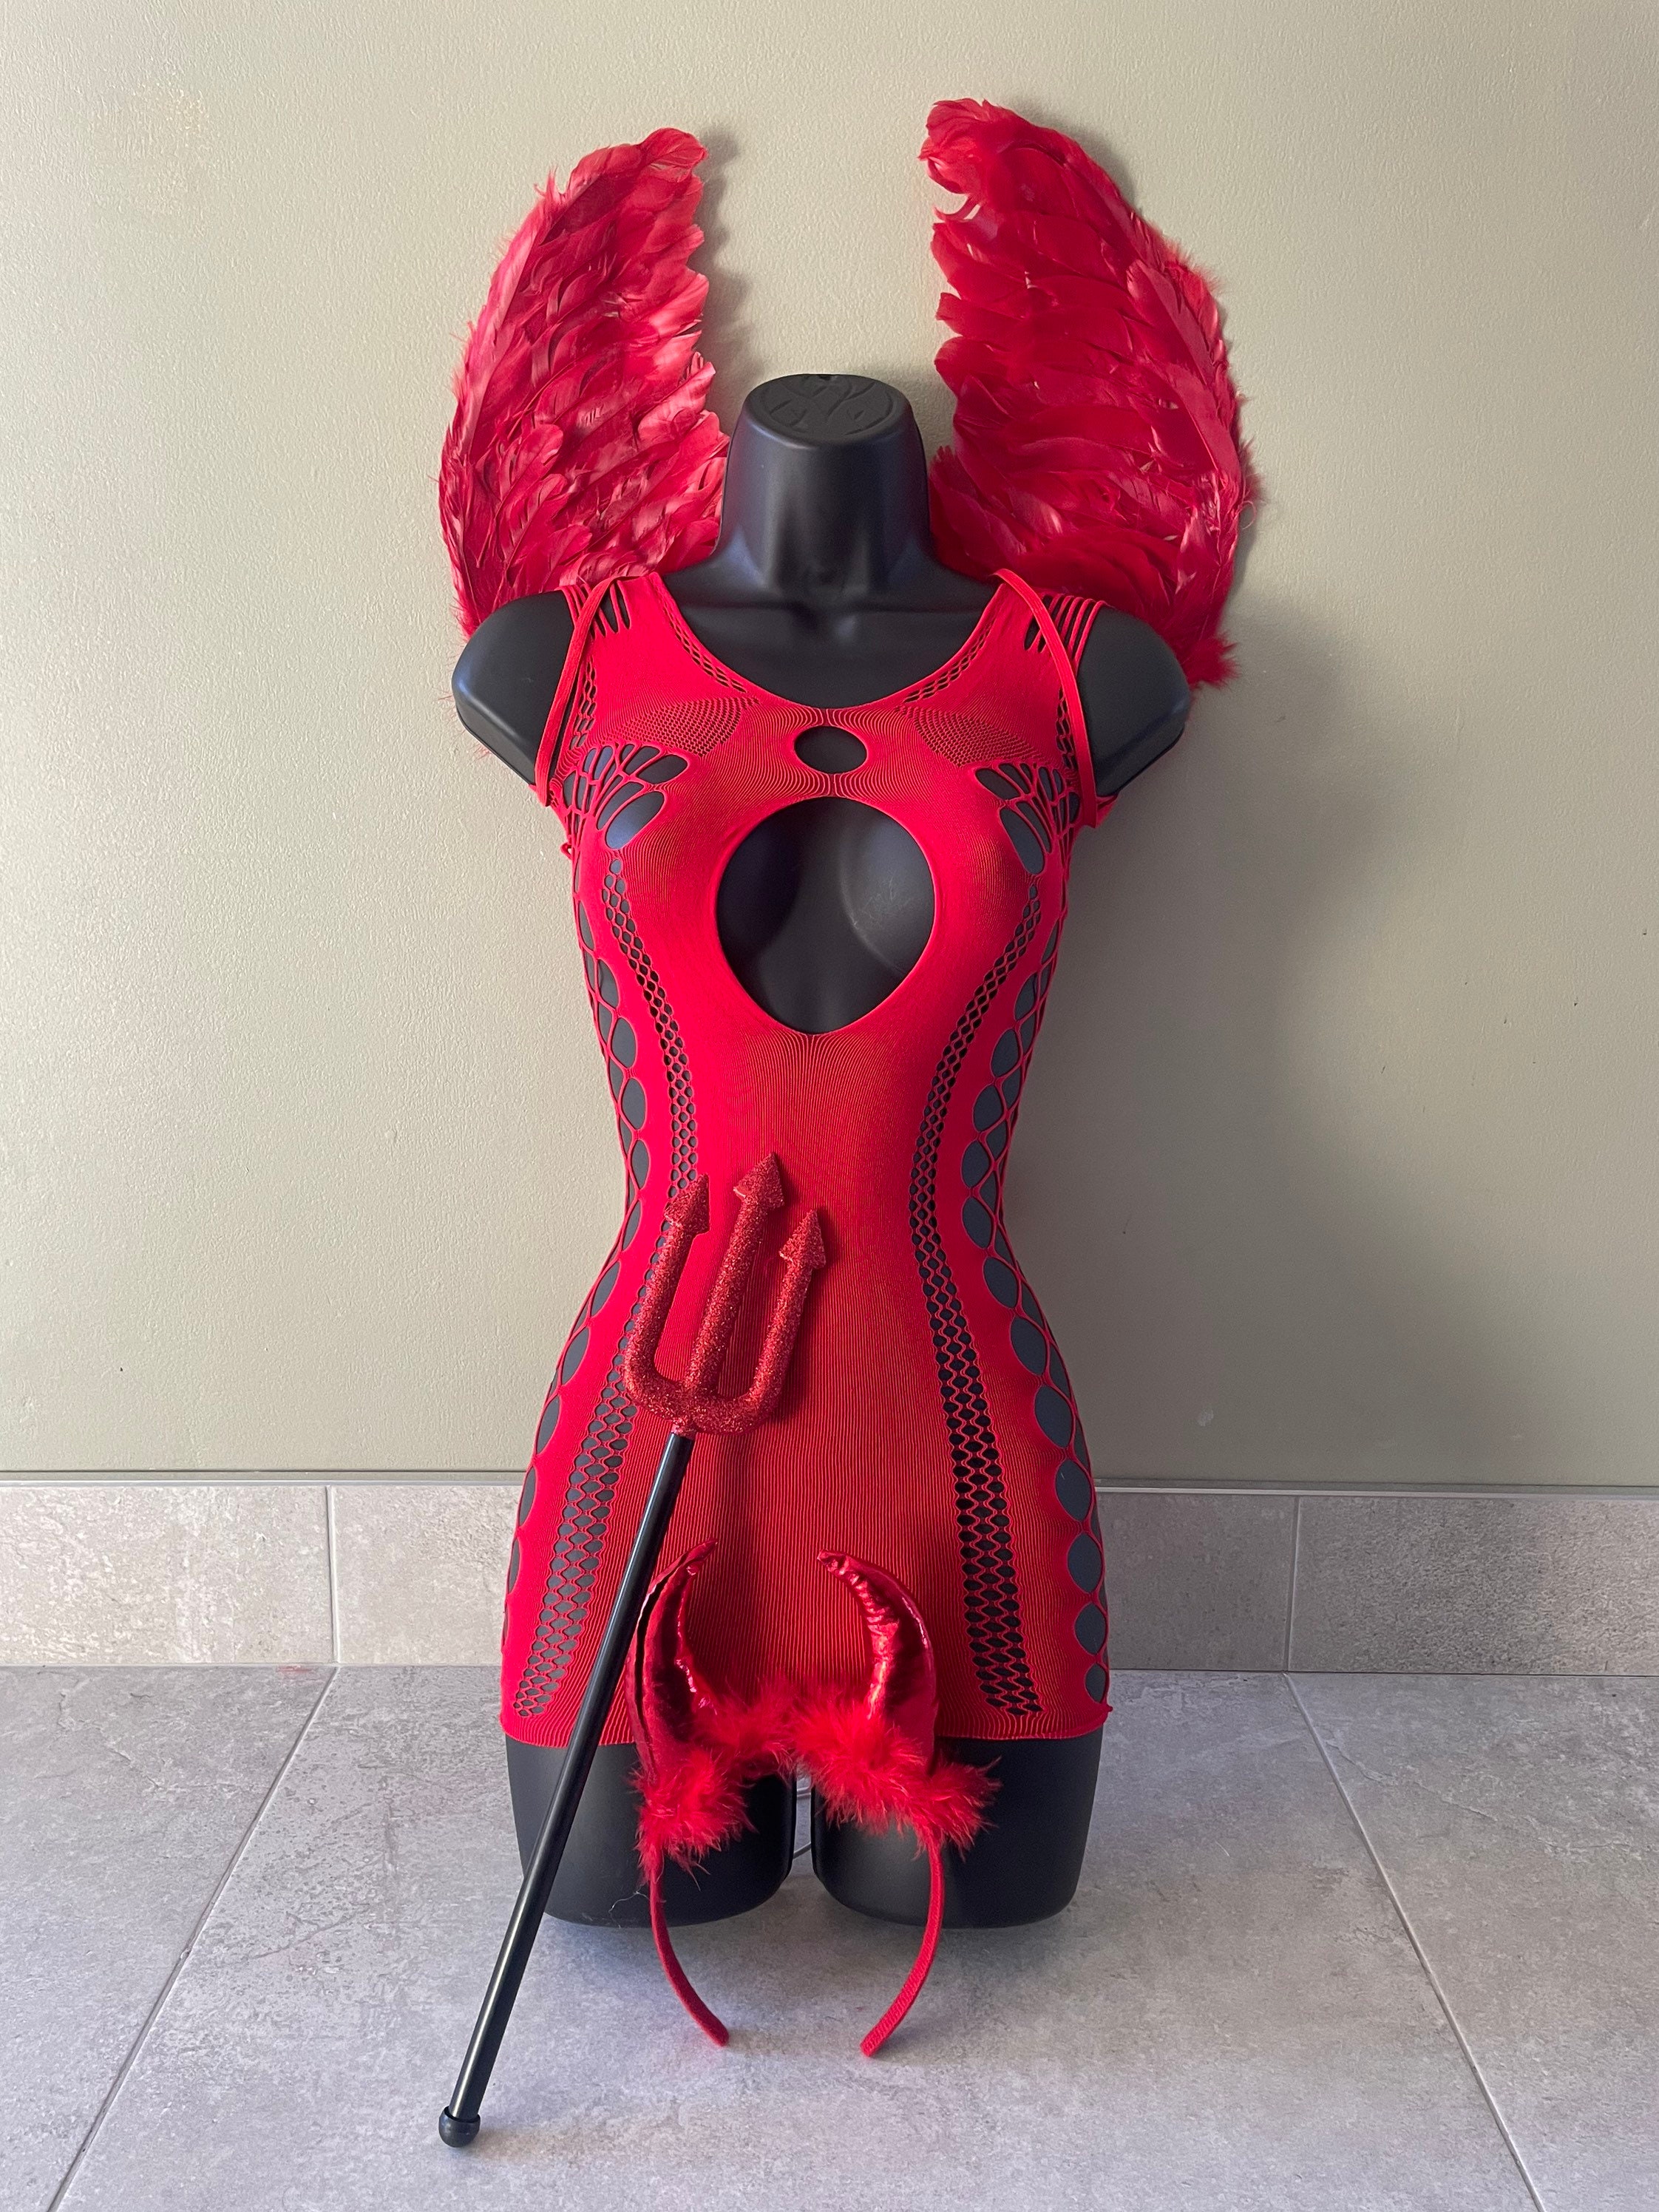 home made devil costumes for adults Porn Pics Hd